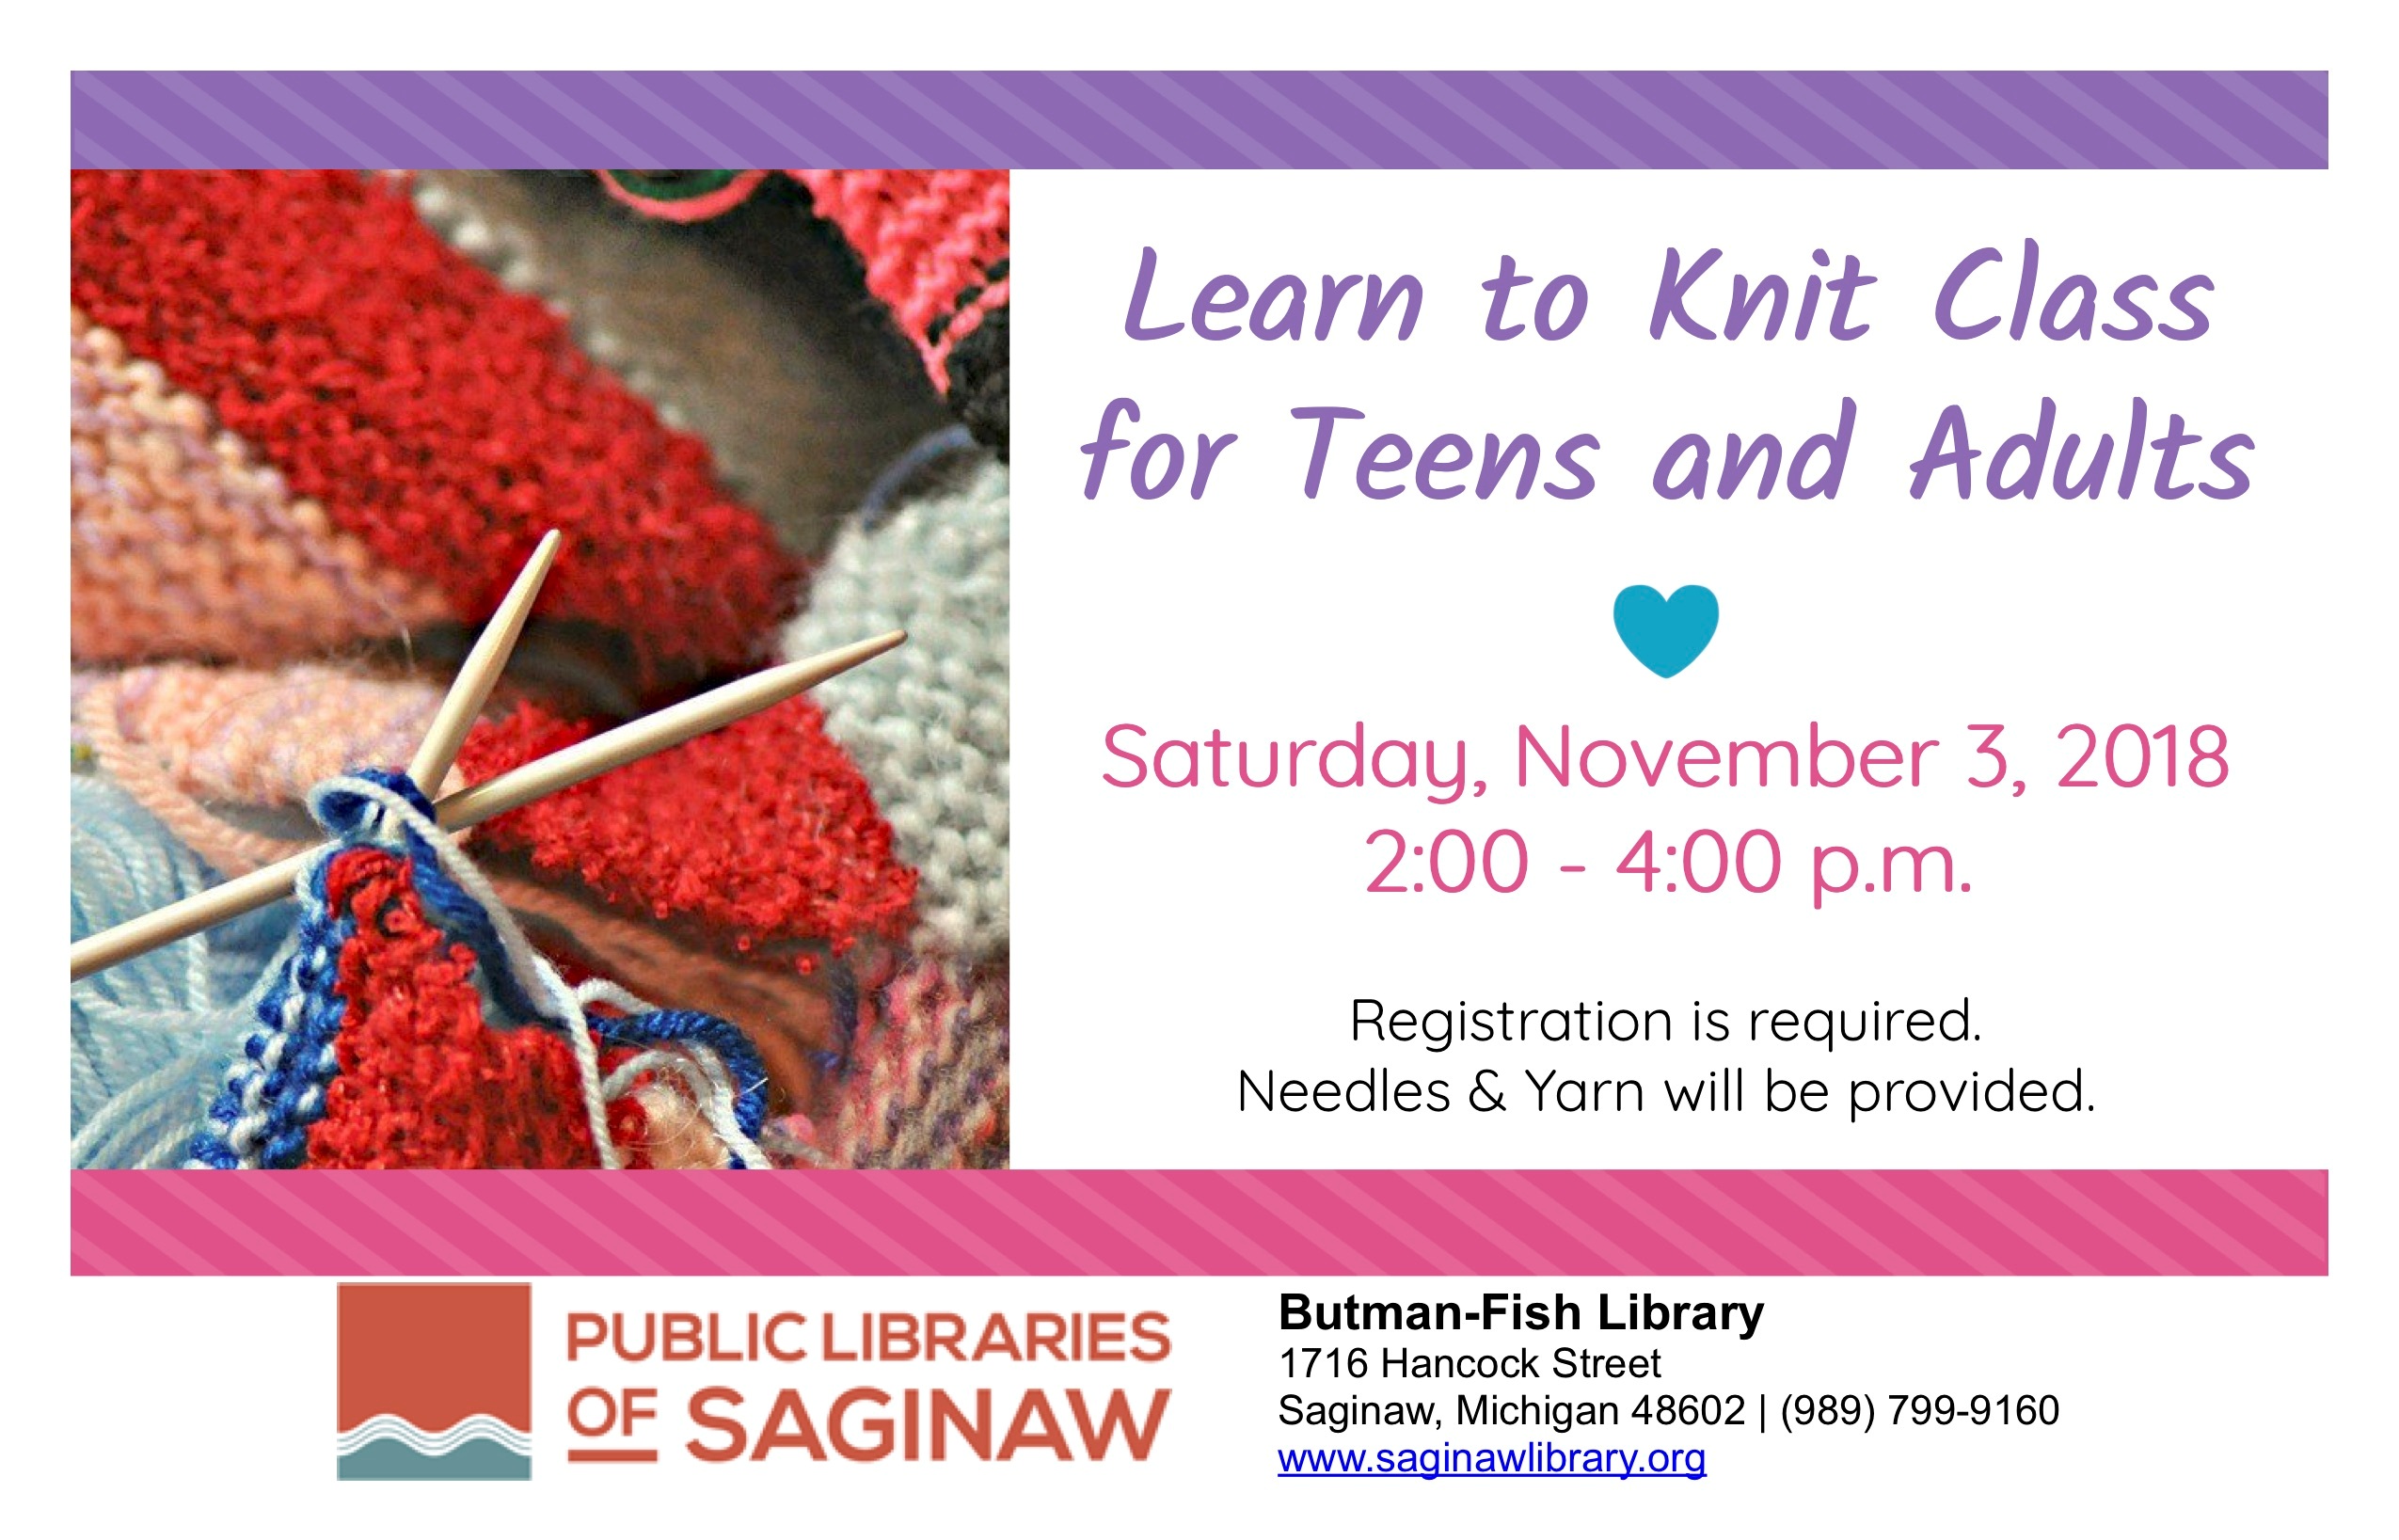 Learn to knit Saturday November 3 at 2pm- Teens and Adults.